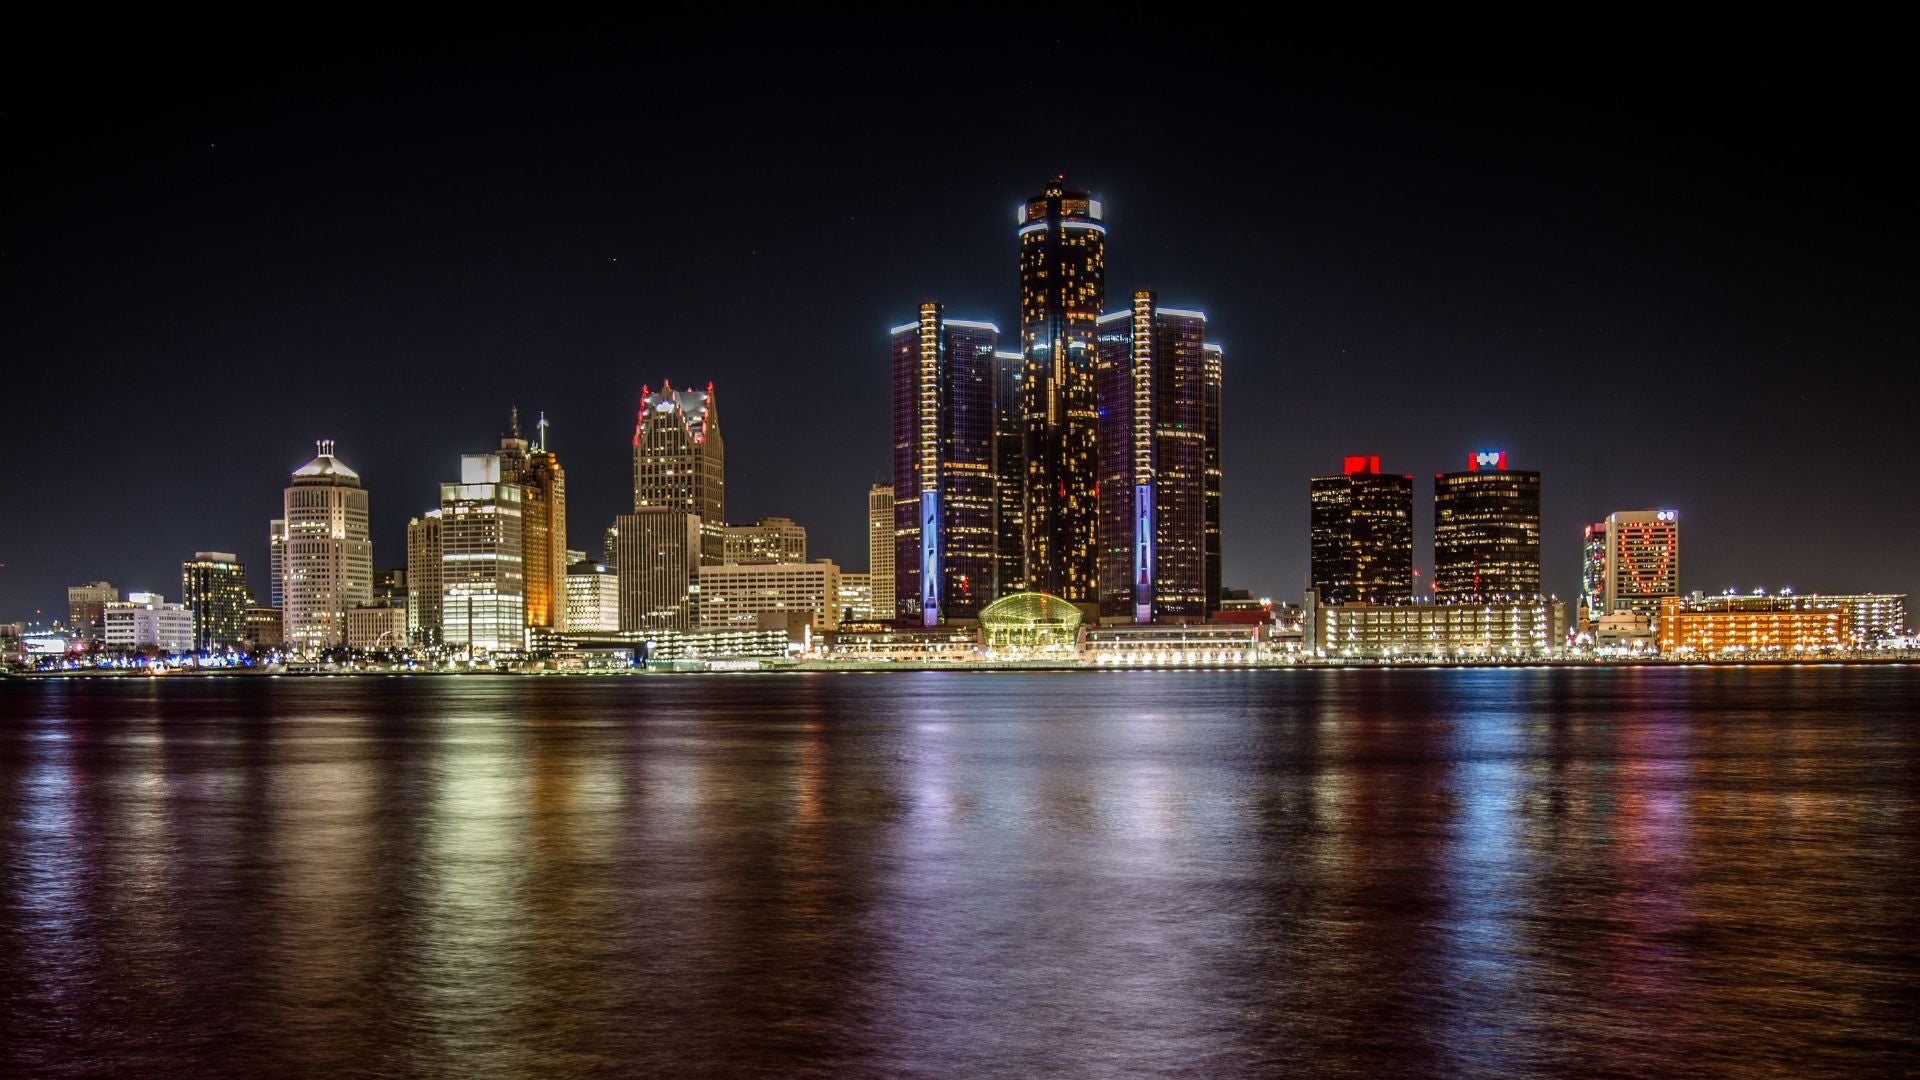 Detroit skyline at night. - History By Mail